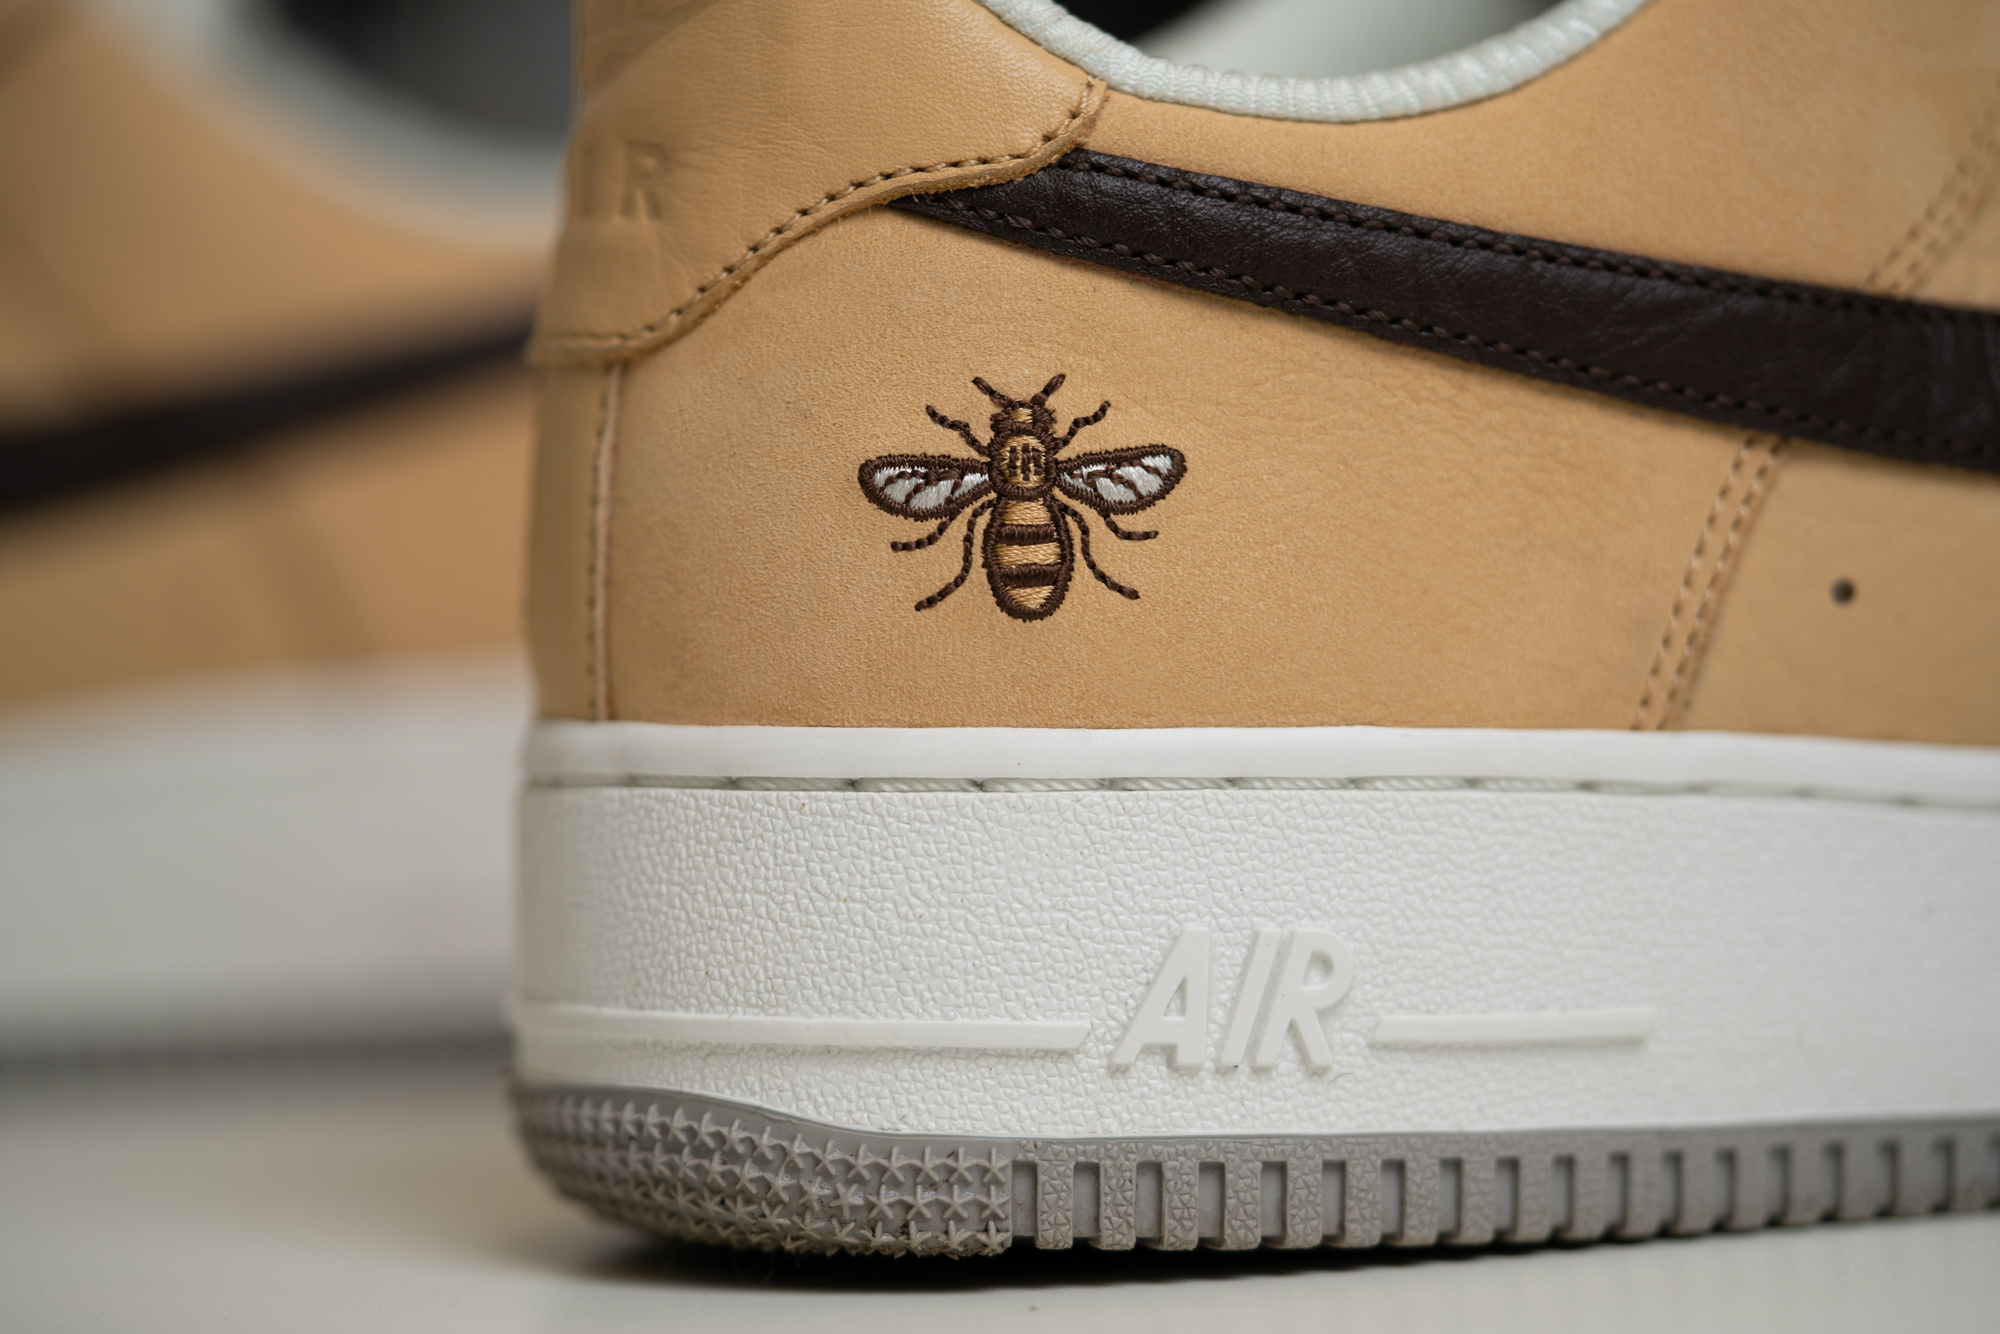 Nike Air Force 1 Low 'Manchester Bee'